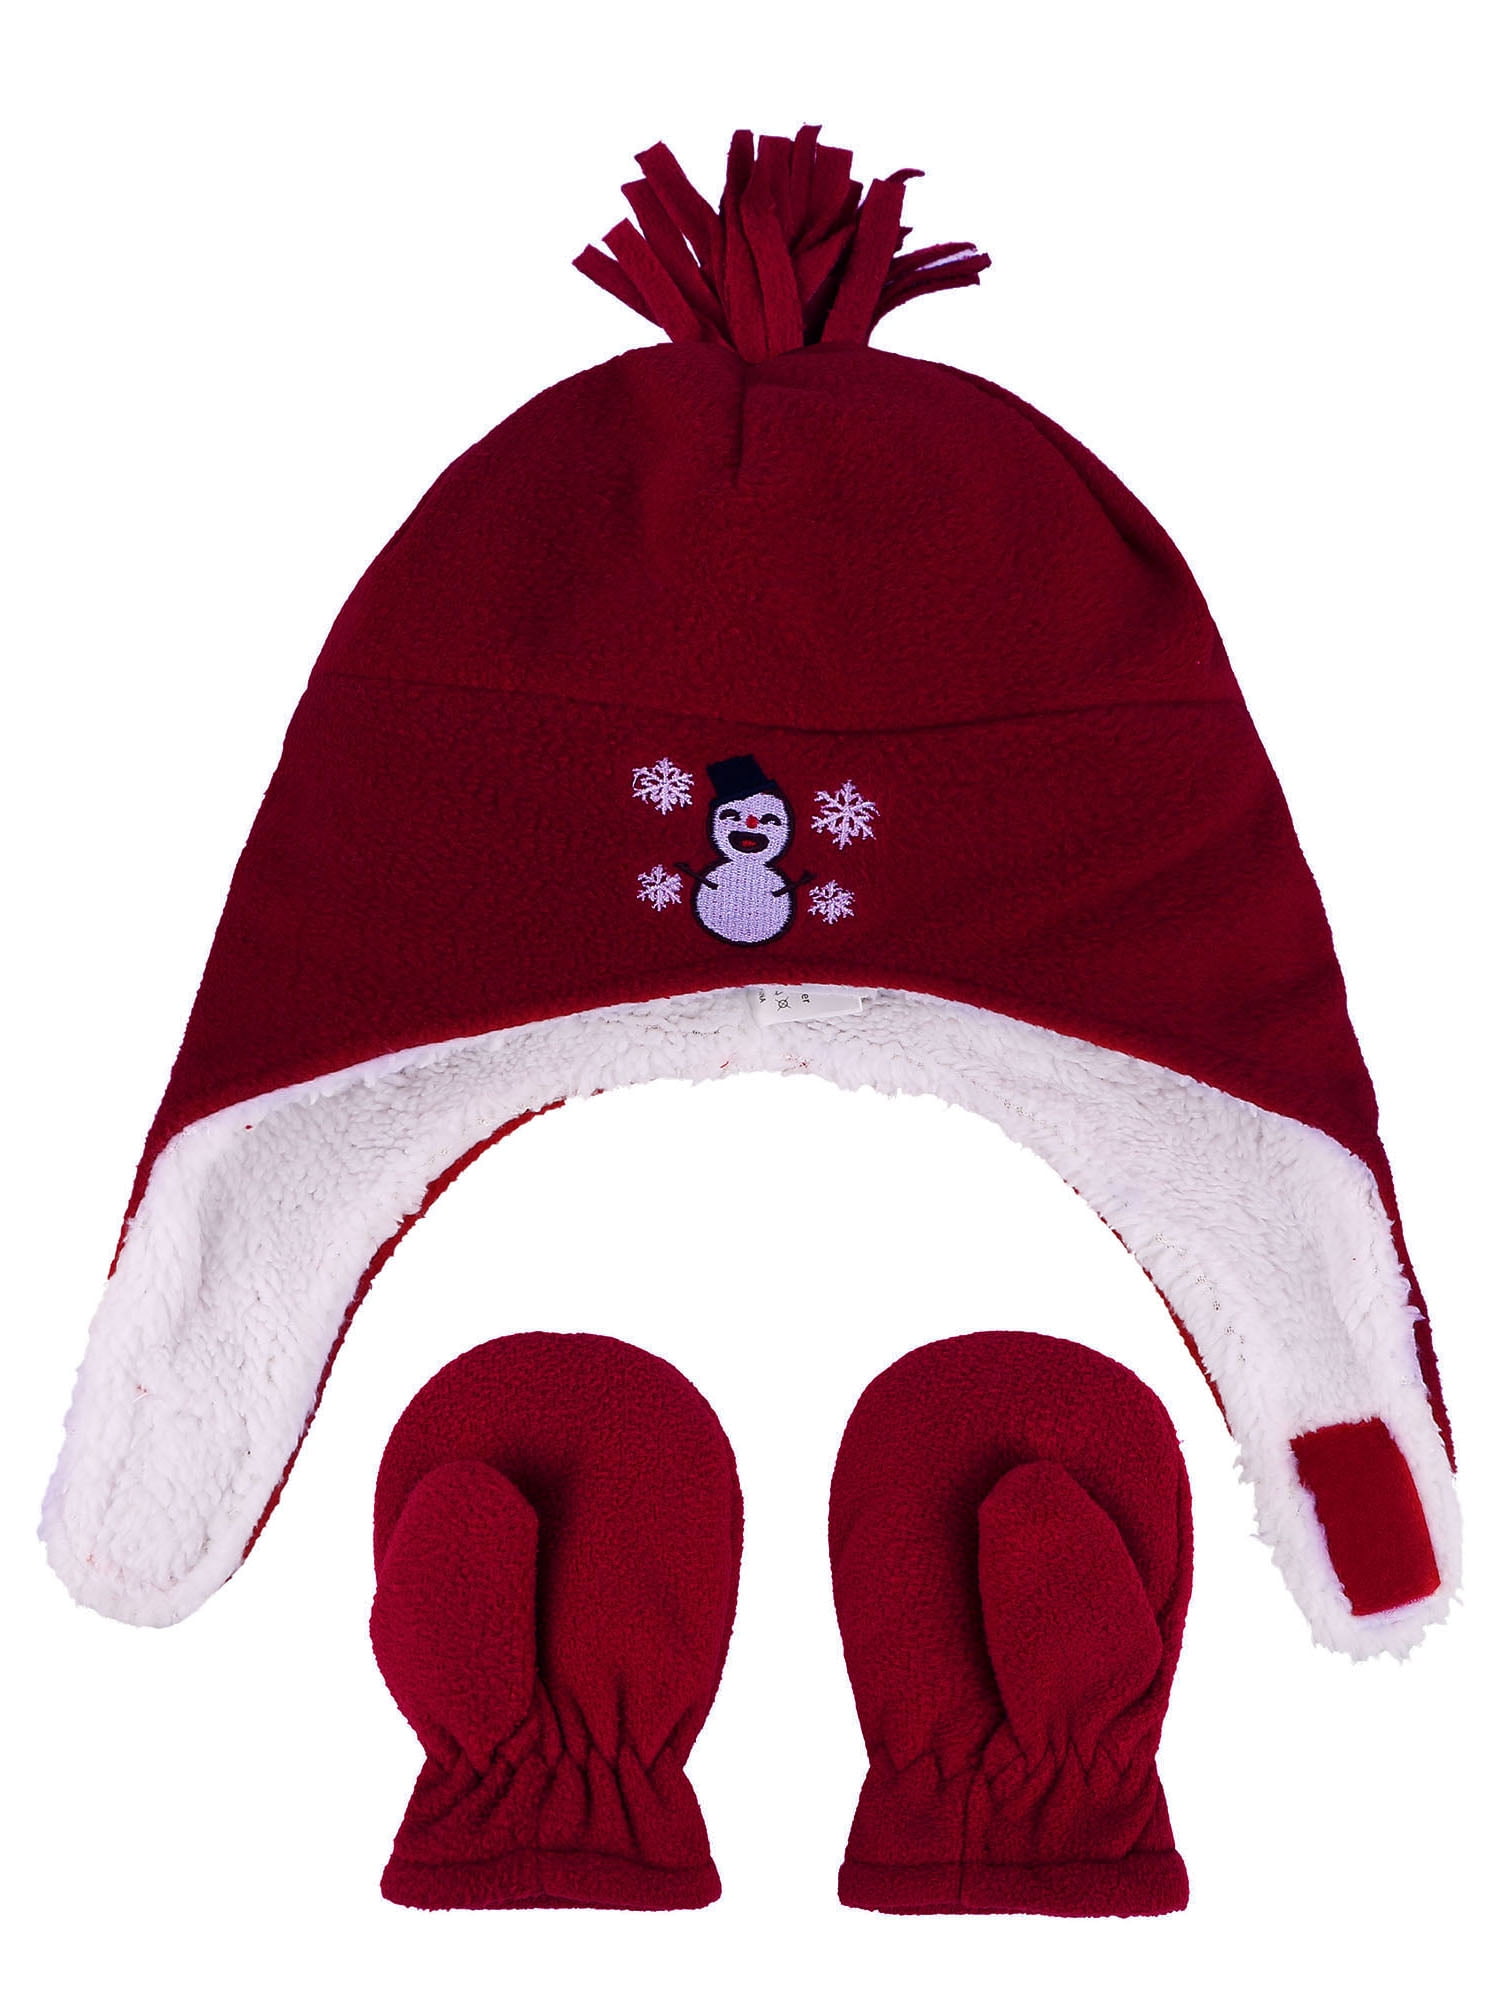 Embroidered Childs fleece stocking hat